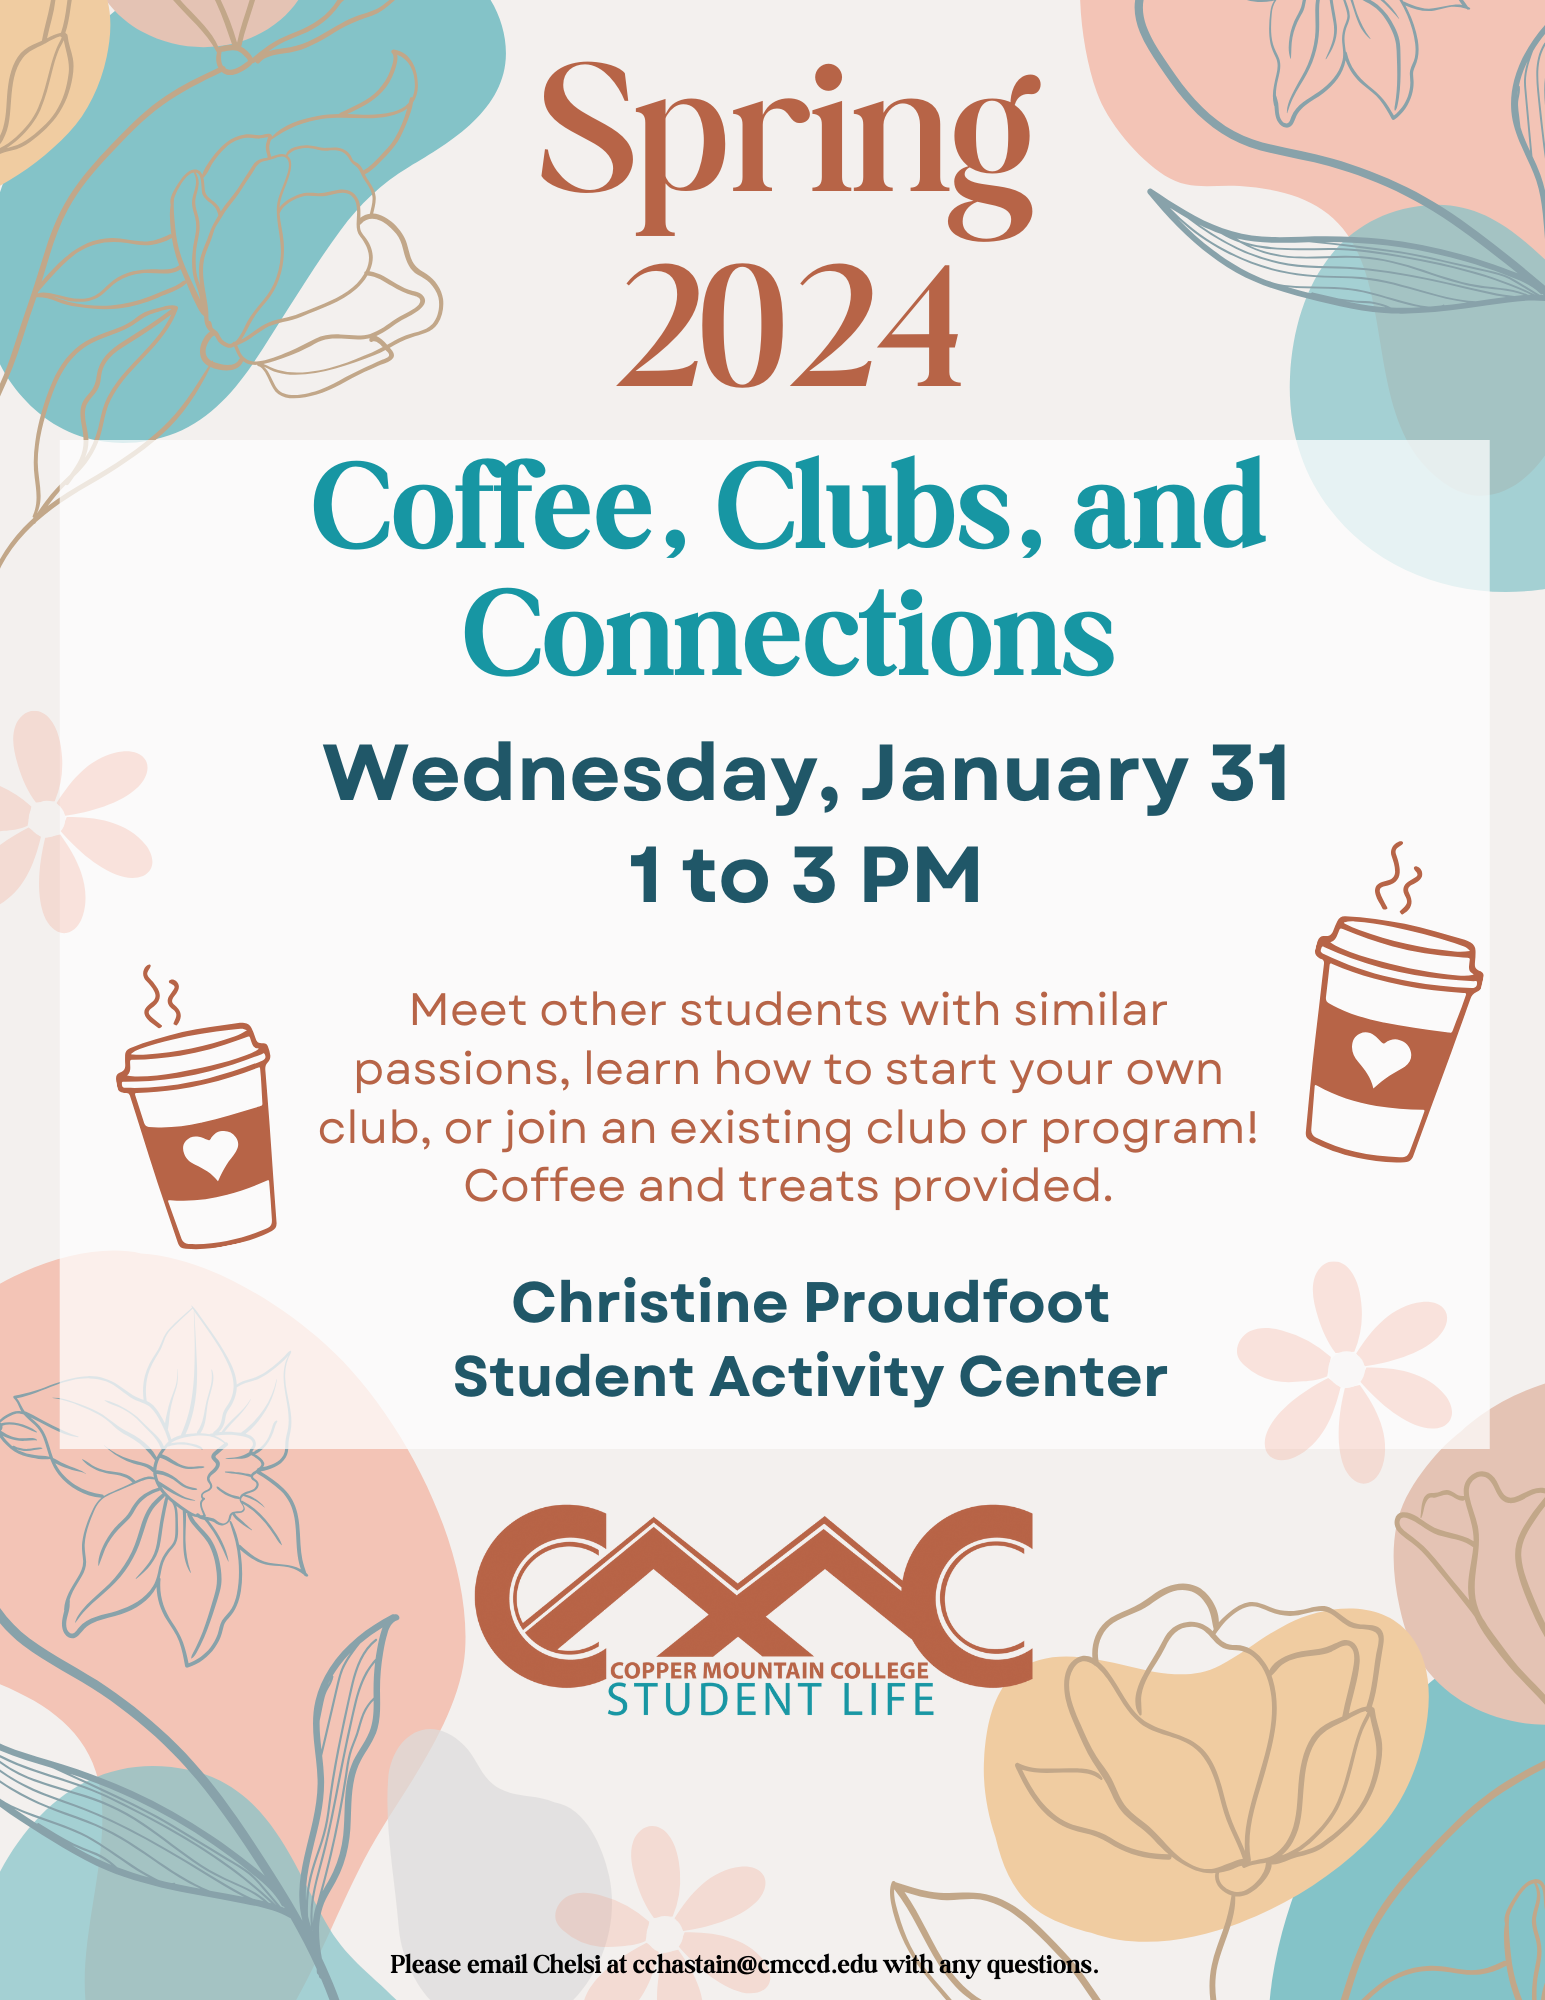 Join us for Coffee, Clubs and Connections on Wednesday, January 31st 1 to 3 PM